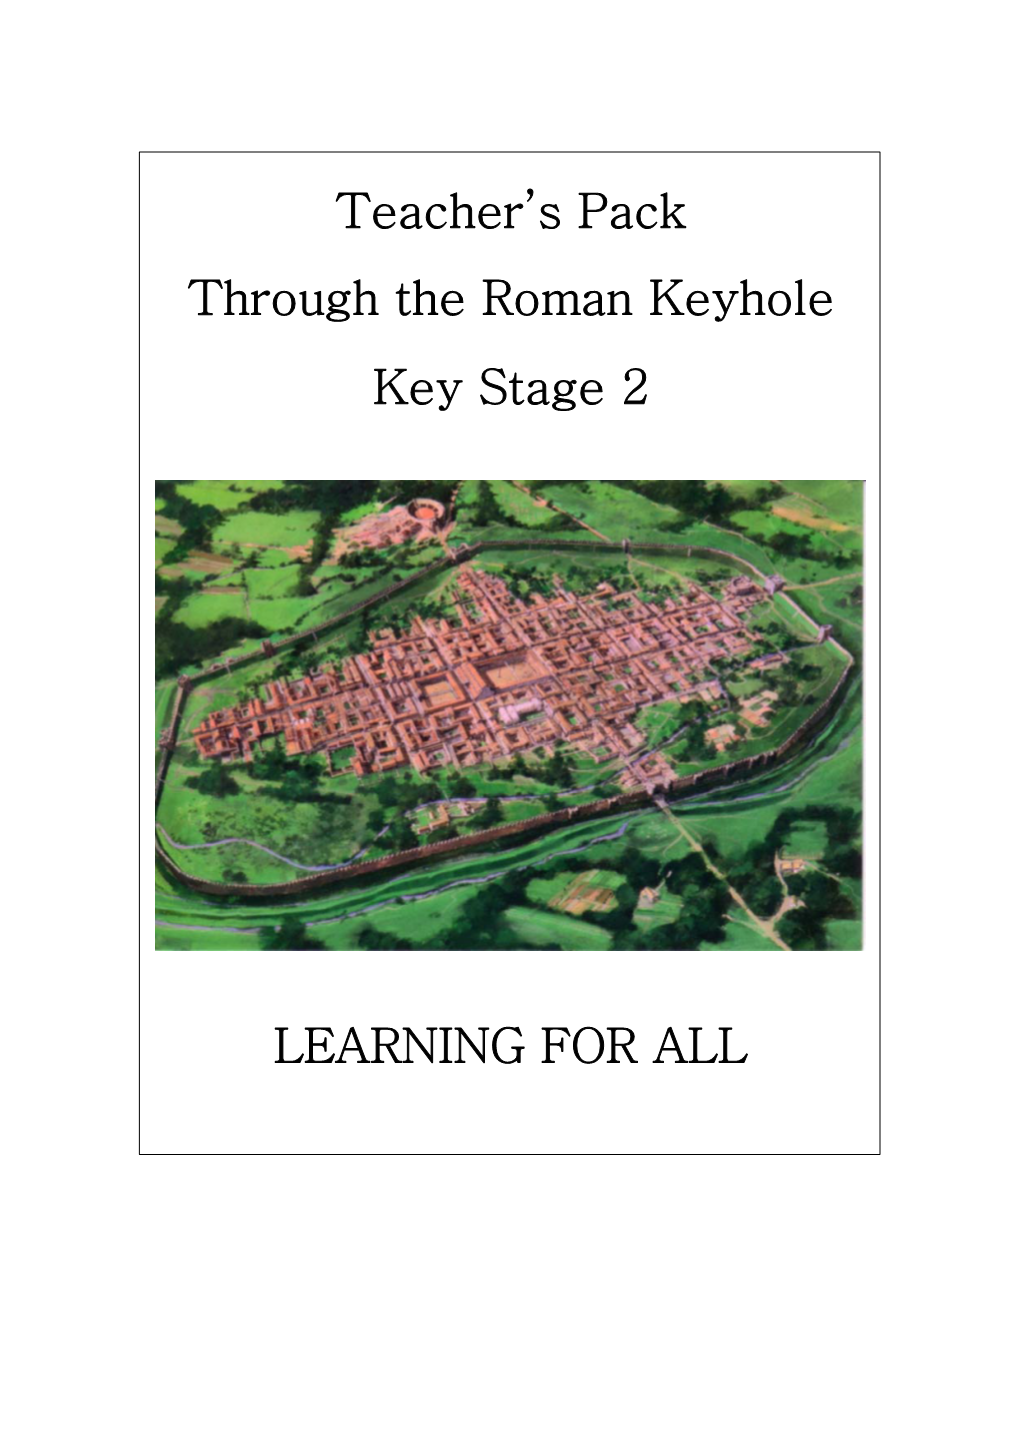 Teacher's Pack Through the Roman Keyhole Key Stage 2 LEARNING